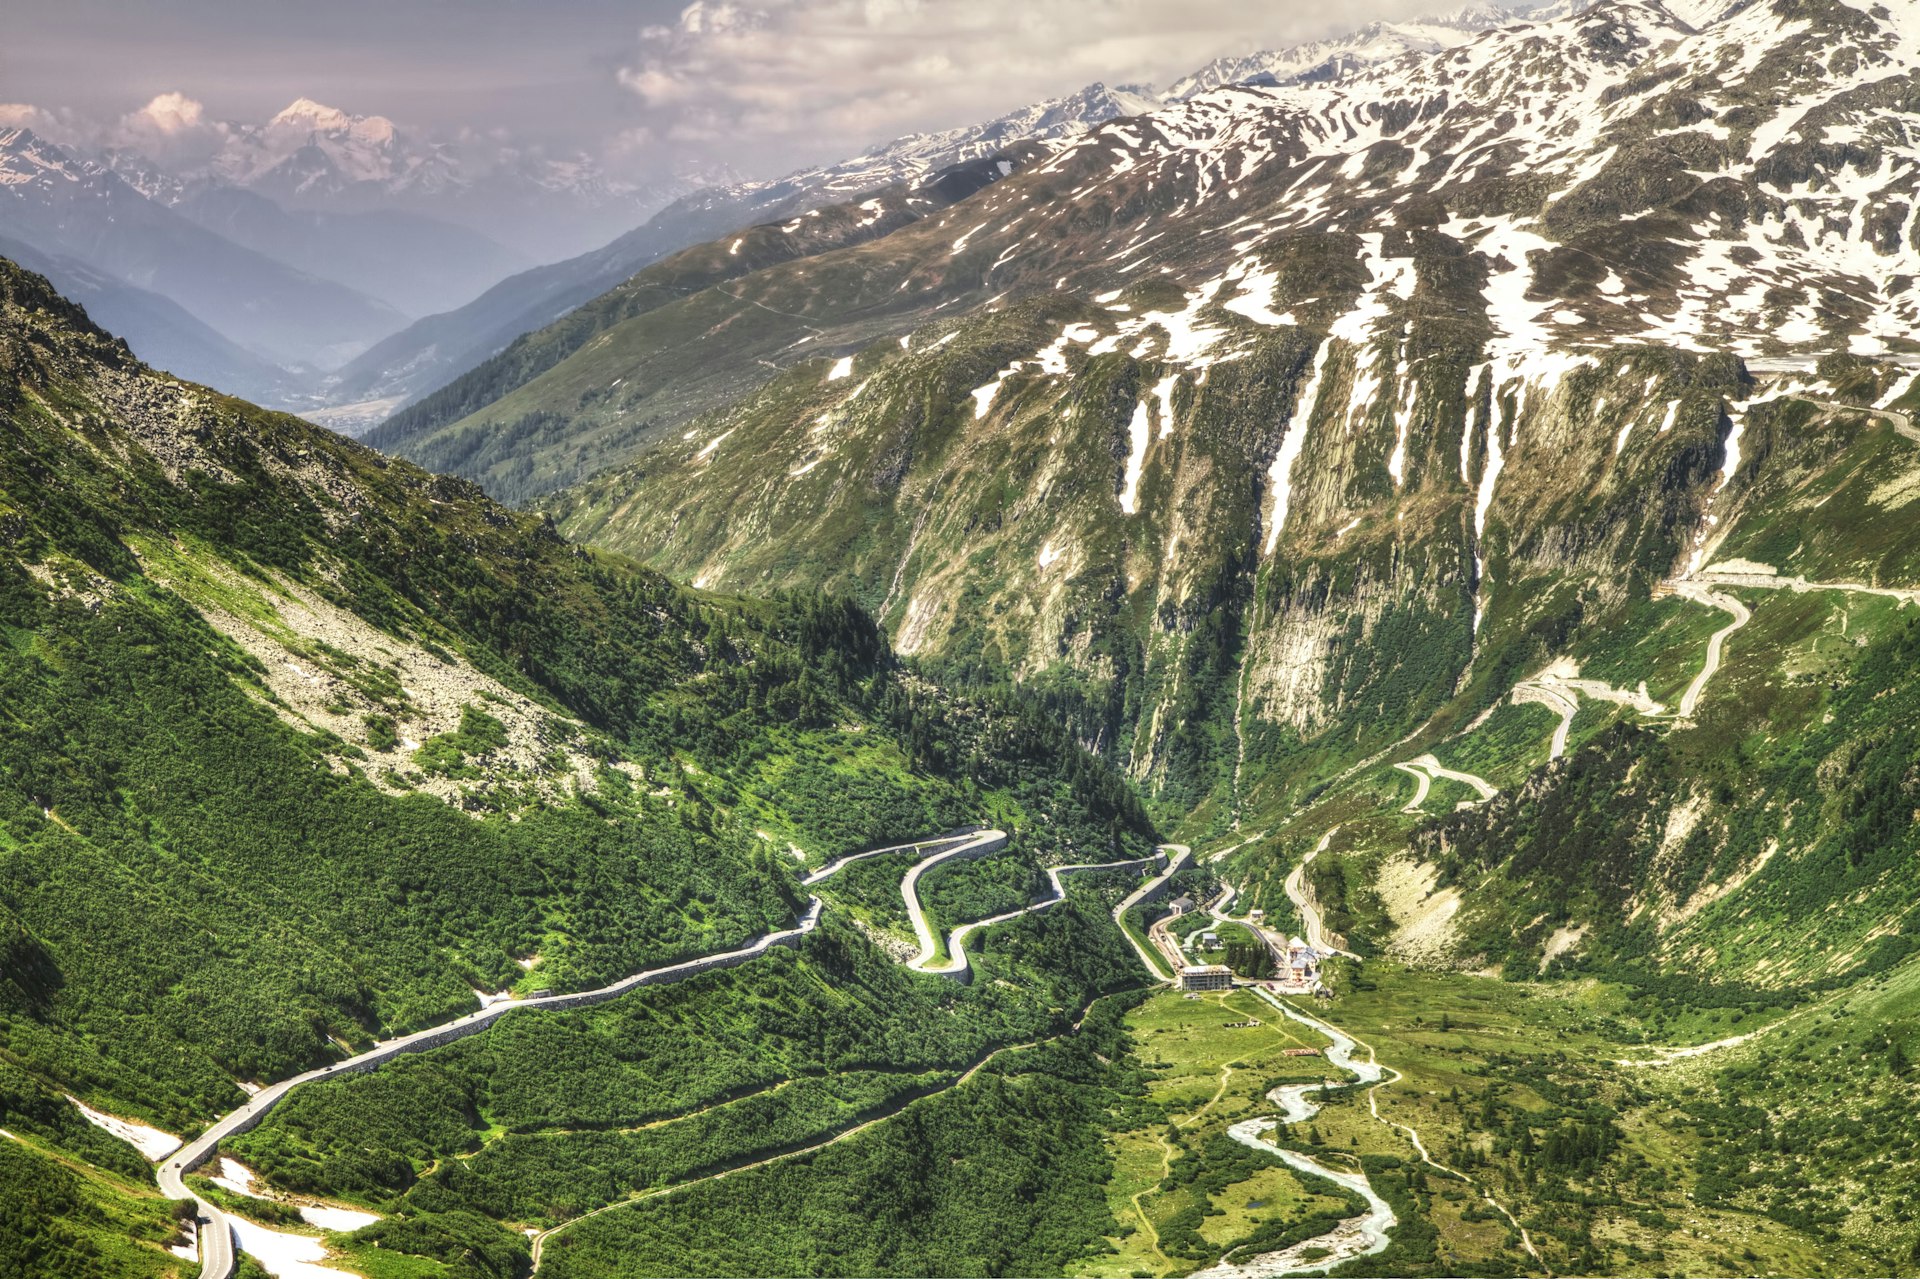 A road winds through mountains with many tight bends and switchbacks